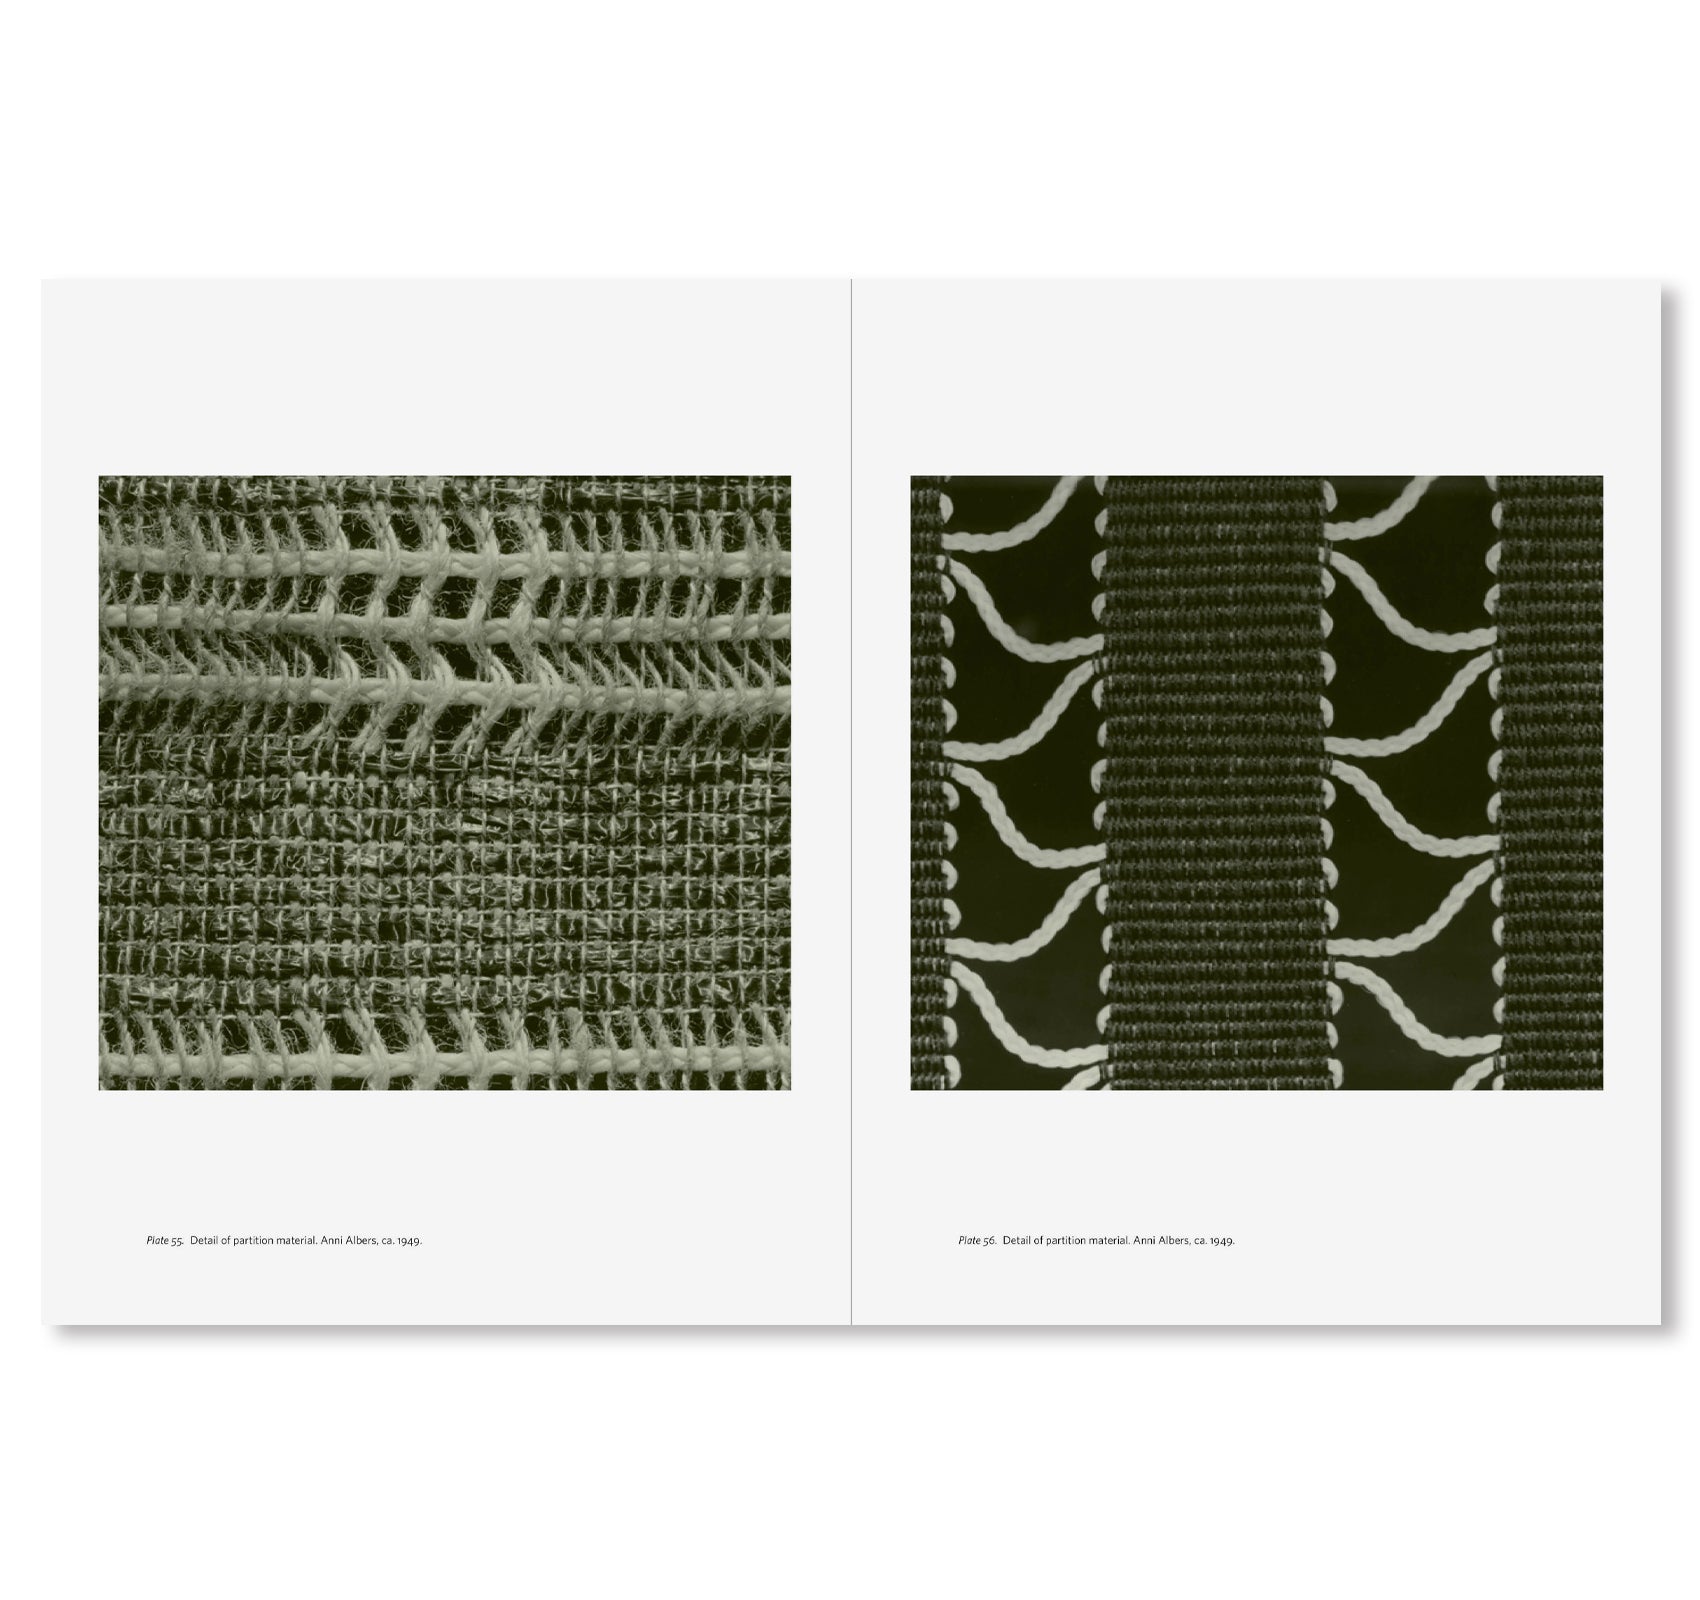 ON WEAVING: NEW EXPANDED EDITION by Anni Albers